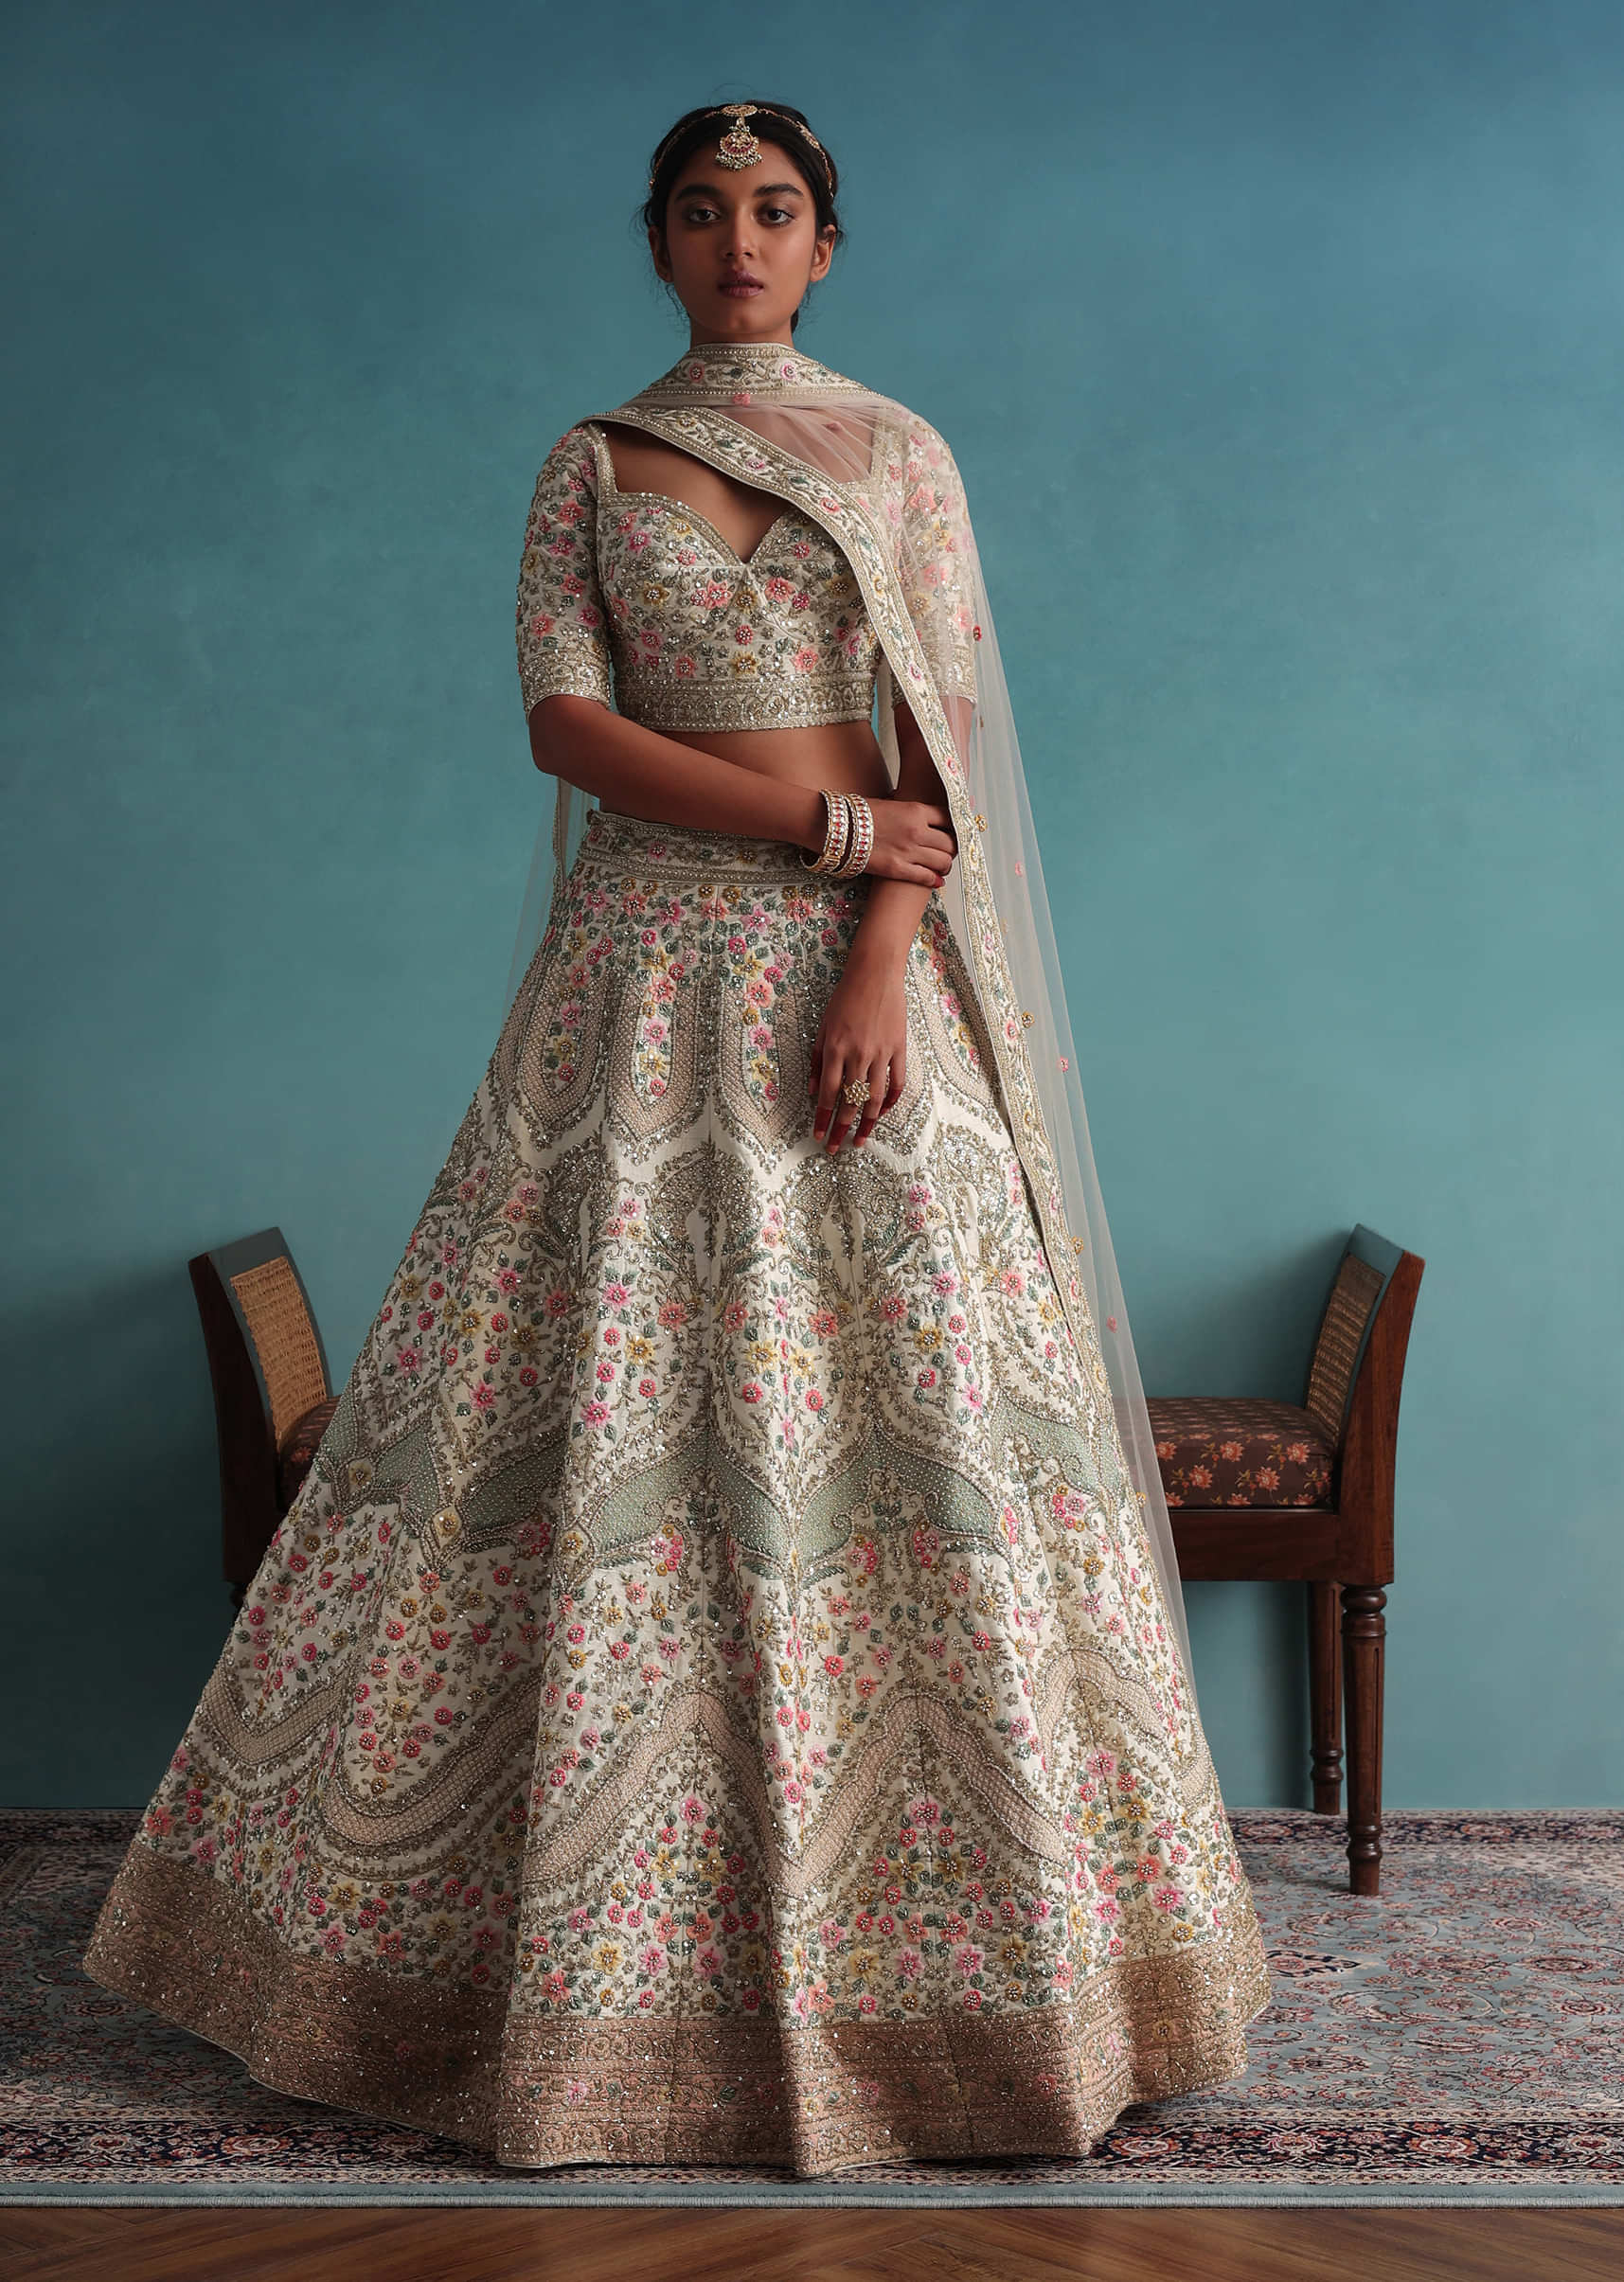 Pearl White Embroidered 12 Kali Bridal Lehenga In Raw Silk With Hand Embroidery